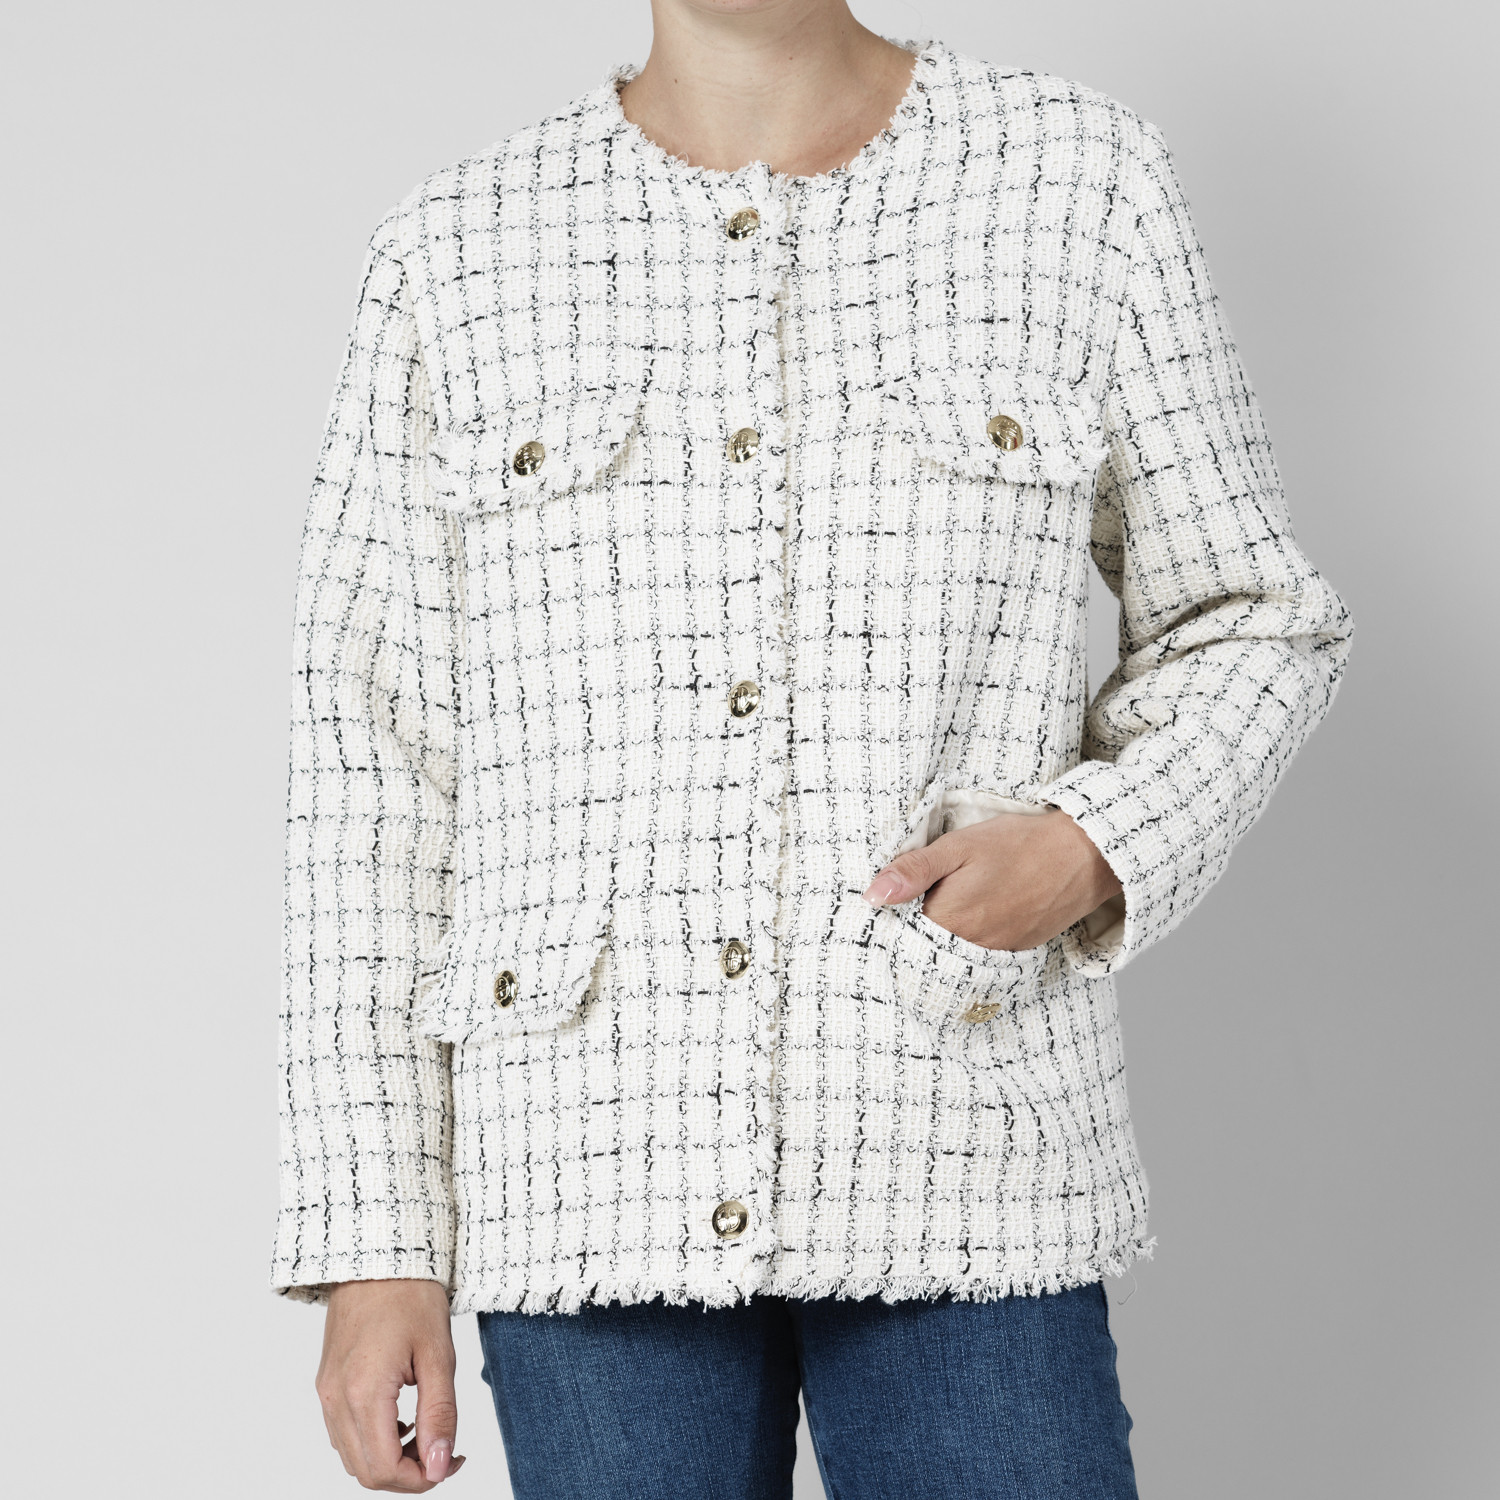 Janet Jacket - Just in this Month - New Arrivals - iiSA of Malmö